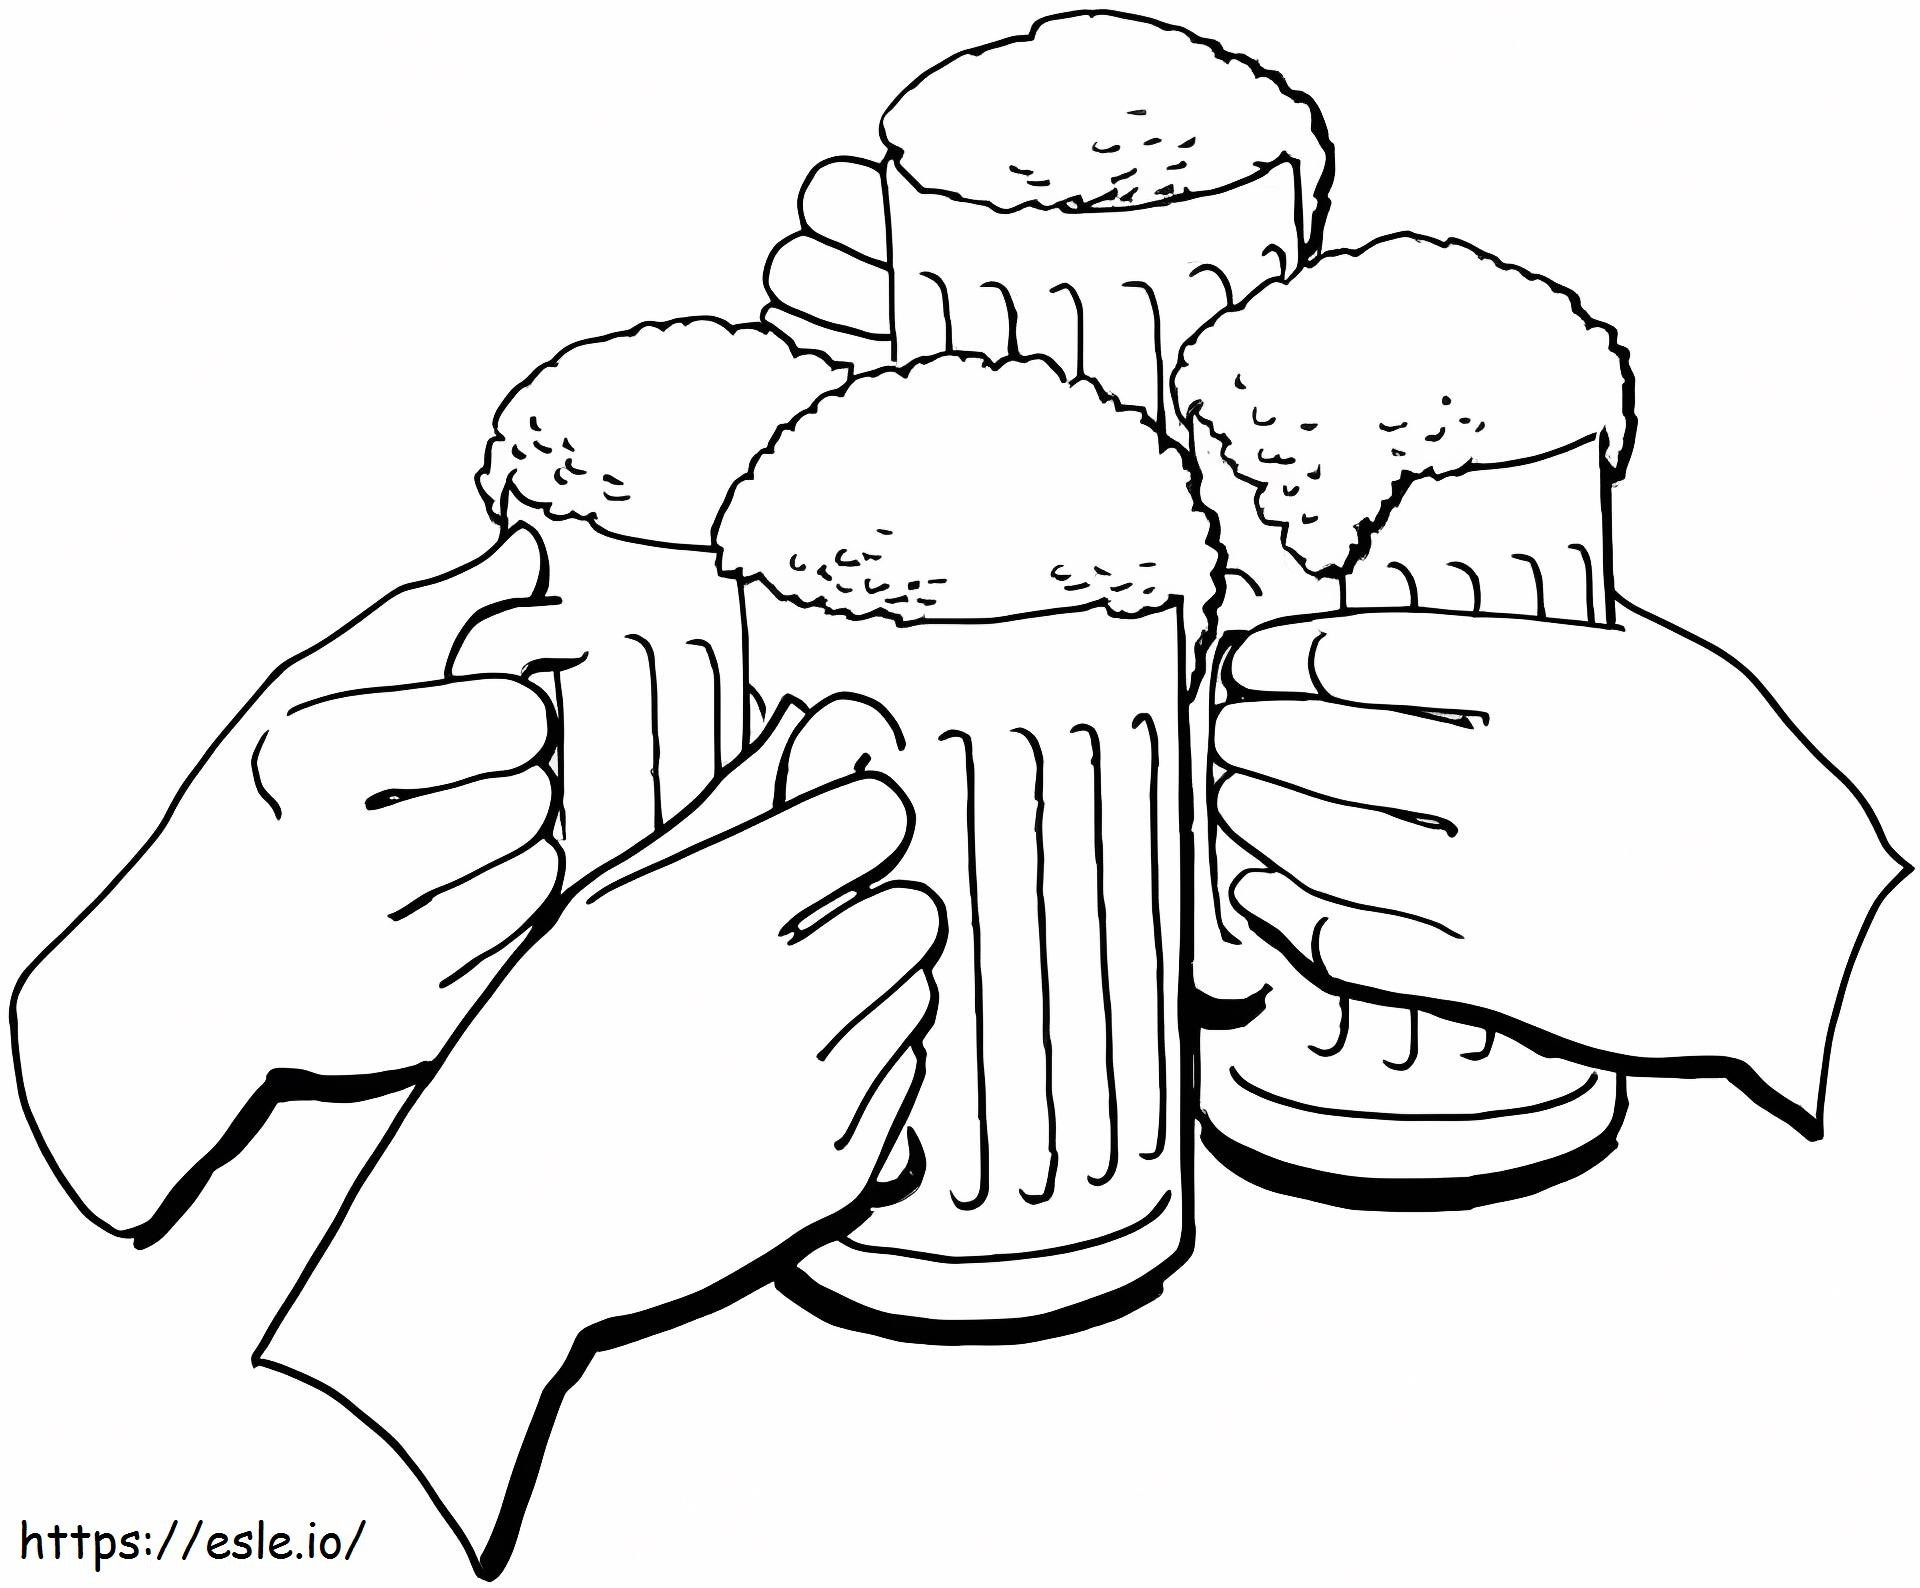 Greetings To Oktoberfest coloring page